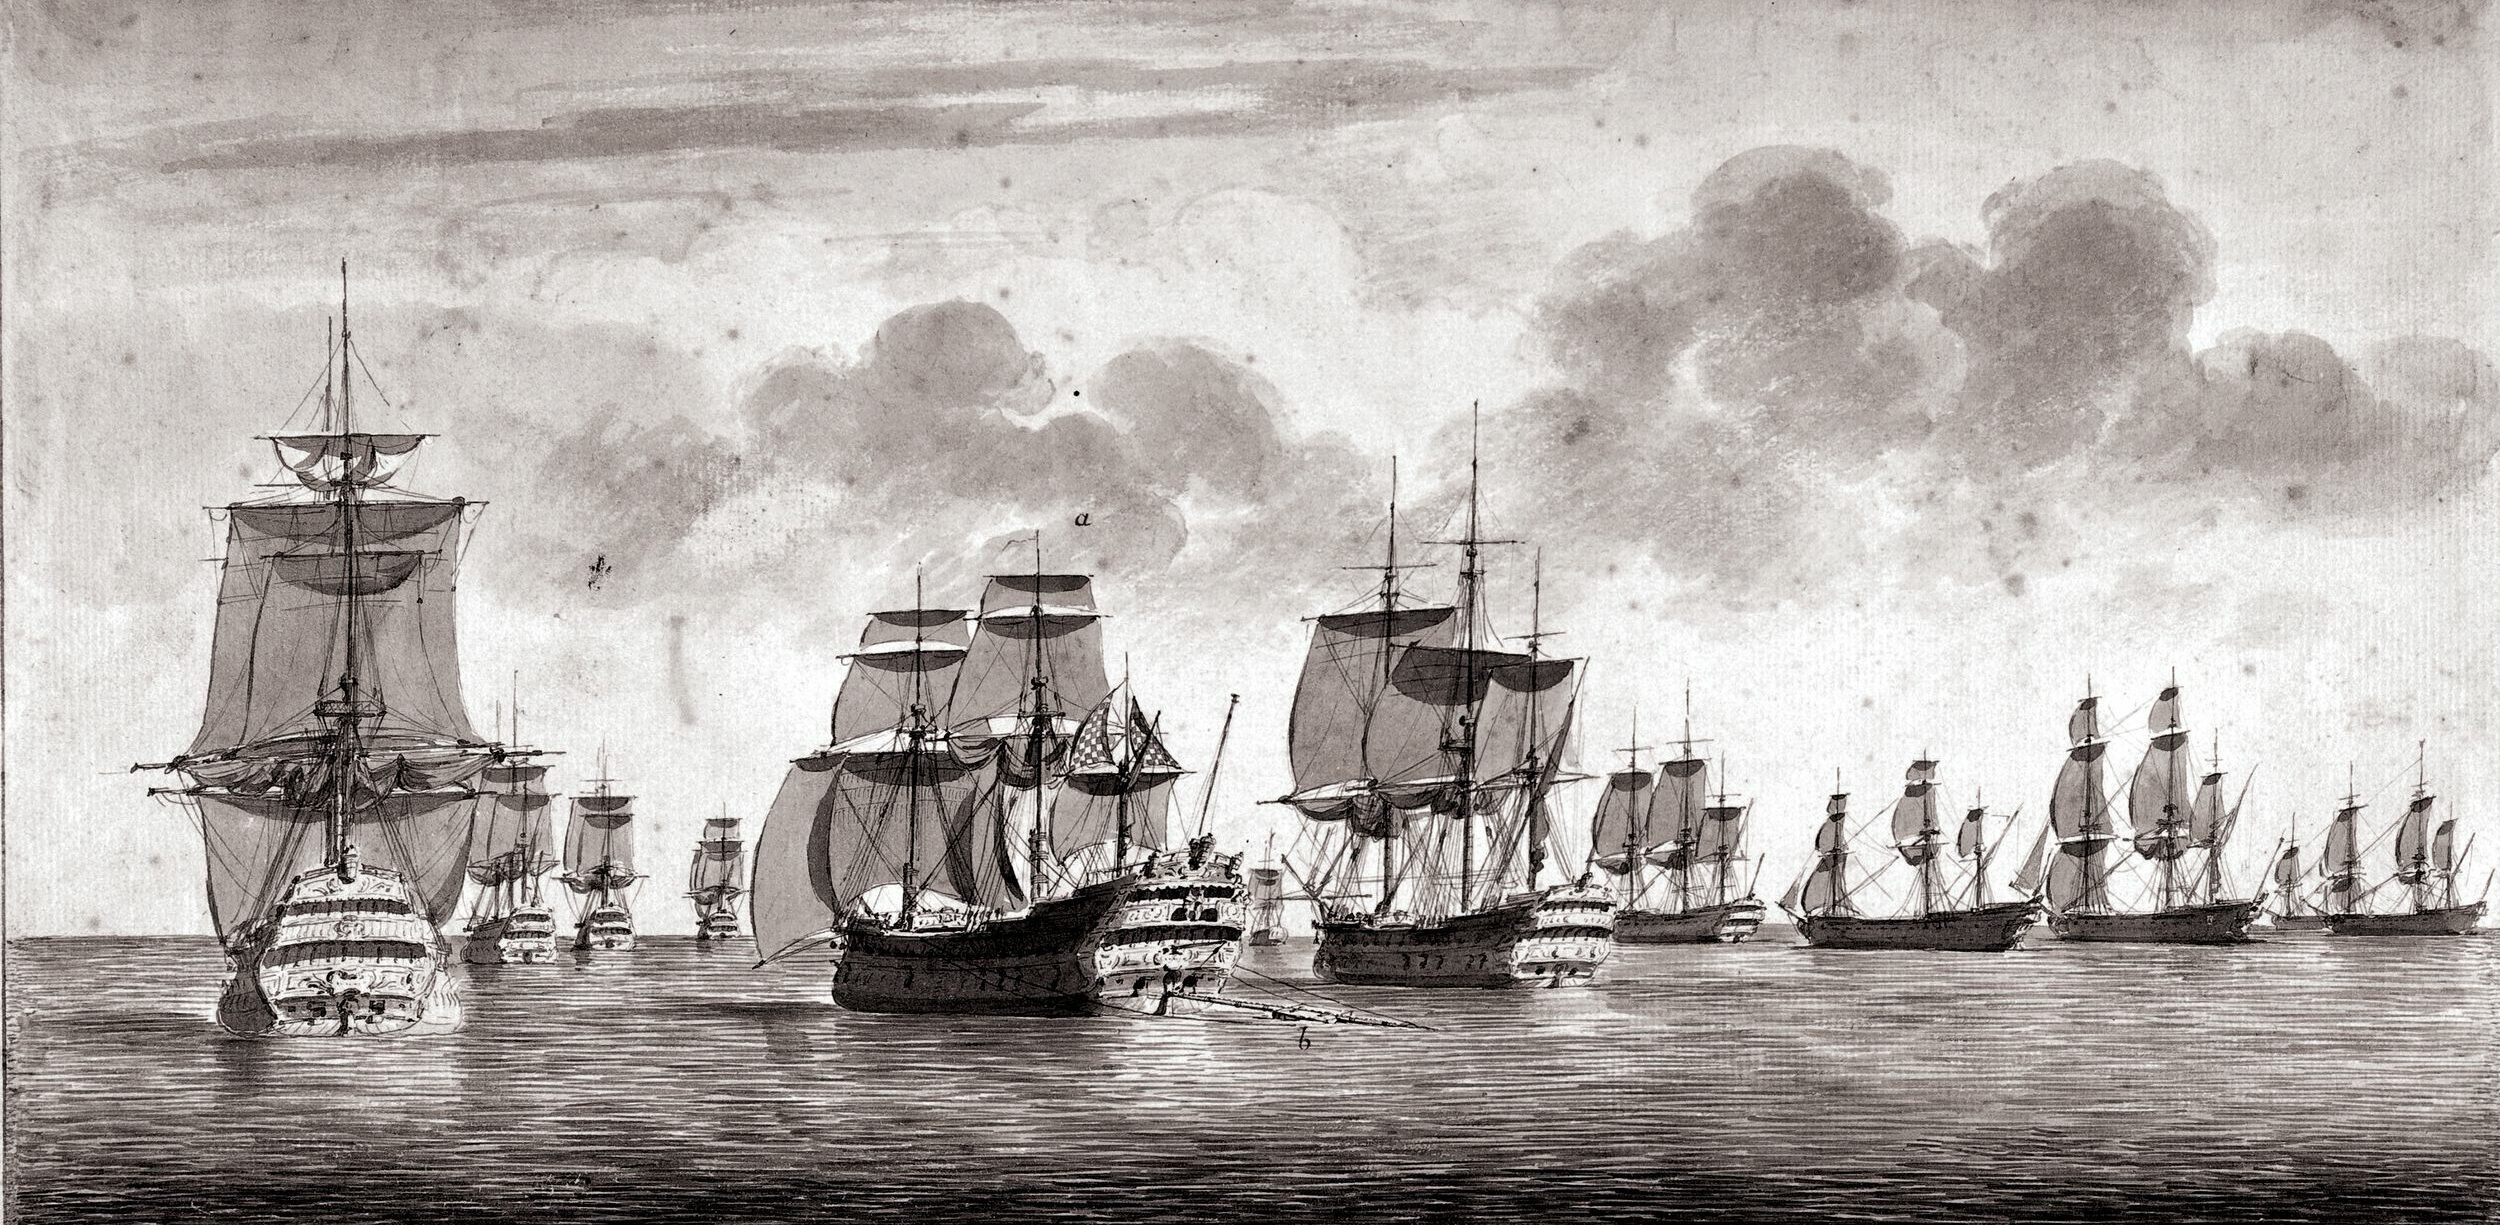 D’Estaing sought to engage British Vice Admiral Richard Howe’s fleet in the waters off Newport, Rhode Island, but a violent storm dispersed the fleets. Afterwards, D’Estaing sailed to Boston to repair his damaged ships, abandoning the Americans besieging Newport.